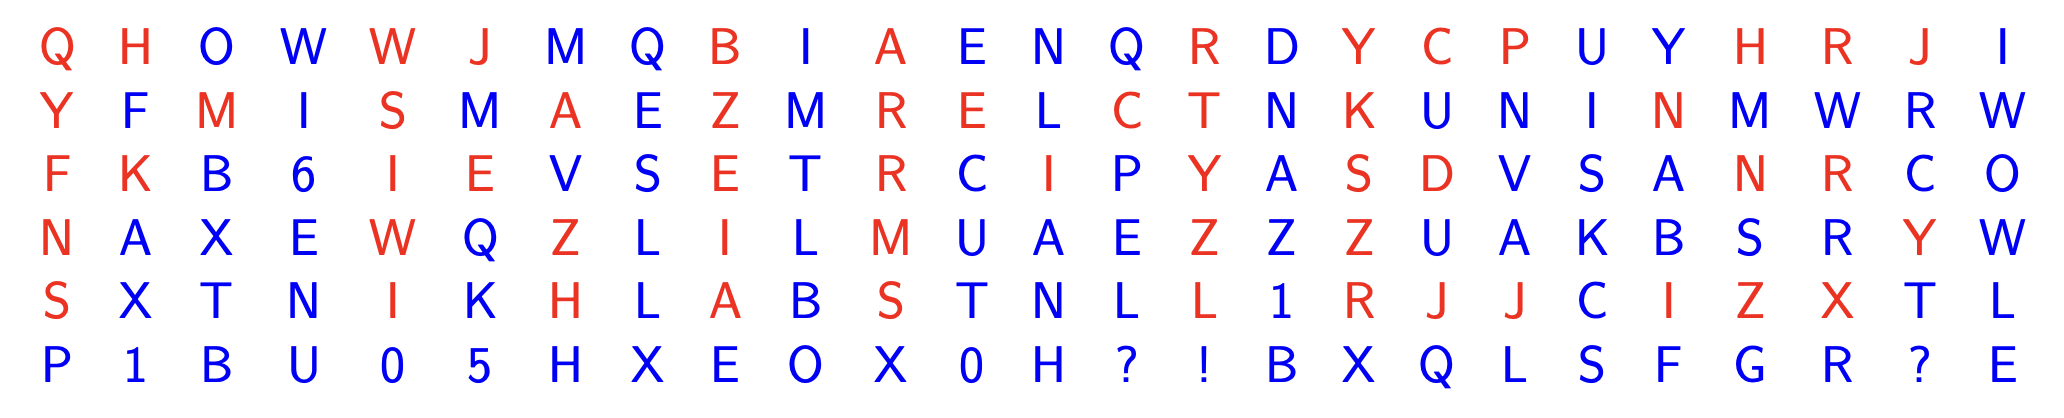  A grid of 150 letters, numbers and punctuation marks arranged in 6 rows, each comprising 25 characters.  The letters, numbers and punctuation marks are coloured either red or blue, as described below (reading across each row in turn).  Row 1: The letter Q in red. The letter H in red. The letter O in blue. The letter W in blue. The letter W in red. The letter J in red. The letter M in blue. The letter Q in blue. The letter B in red. The letter I in blue. The letter A in red. The letter E in blue. The letter N in blue. The letter Q in blue. The letter R in red. The letter D in blue. The letter Y in red. The letter C in red. The letter P in red. The letter U in blue. The letter Y in blue. The letter H in red. The letter R in red. The letter J in red. The letter I in blue.  Row 2: The letter Y in red. The letter F in blue. The letter M in red. The letter I in blue. The letter S in red. The letter M in blue. The letter A in red. The letter E in blue. The letter Z in red. The letter M in blue. The letter R in red. The letter E in red. The letter L in blue. The letter C in red. The letter T in red. The letter N in blue. The letter K in red. The letter U in blue. The letter N in blue. The letter I in blue. The letter N in red. The letter M in blue. The letter W in blue. The letter R in blue. The letter W in blue.  Row 3: The letter F in red. The letter K in red. The letter B in blue. The number 6 in blue. The letter I in red. The letter E in red. The letter V in blue. The letter S in blue. The letter E in red. The letter T in blue. The letter R in red. The letter C in blue. The letter I in red. The letter P in blue. The letter Y in red. The letter A in blue. The letter S in red. The letter D in red. The letter V in blue. The letter S in blue. The letter A in blue. The letter N in red. The letter R in red. The letter C in blue. The letter O in blue.  Row 4: The letter N in red. The letter A in blue. The letter X in blue. The letter E in blue. The letter W in red. The letter Q in blue. The letter Z in red. The letter L in blue. The letter I in red. The letter L in blue. The letter M in red. The letter U in blue. The letter A in blue. The letter E in blue. The letter Z in red. The letter Z in blue. The letter Z in red. The letter U in blue. The letter A in blue. The letter K in blue. The letter B in blue. The letter S in blue. The letter R in blue. The letter Y in red. The letter W in blue.  Row 5: The letter S in red. The letter X in blue. The letter T in blue. The letter N in blue. The letter I in red. The letter K in blue. The letter H in red. The letter L in blue. The letter A in red. The letter B in blue. The letter S in red. The letter T in blue. The letter N in blue. The letter L in blue. The letter L in red. The number 1 in blue. The letter R in red. The letter J in red. The letter J in red. The letter C in blue. The letter I in red. The letter Z in red. The letter X in red. The letter T in blue. The letter L in blue.  Row 6: The letter P in blue. The number 1 in blue. The letter B in blue. The letter U in blue. The number 0 in blue. The number 5 in blue. The letter H in blue. The letter X in blue. The letter E in blue. The letter O in blue. The letter X in blue. The number 0 in blue. The letter H in blue. A question mark in blue. An exclamation mark in blue. The letter B in blue. The letter X in blue. The letter Q in blue. The letter L in blue. The letter S in blue. The letter F in blue. The letter G in blue. The letter R in blue. A question mark in blue.